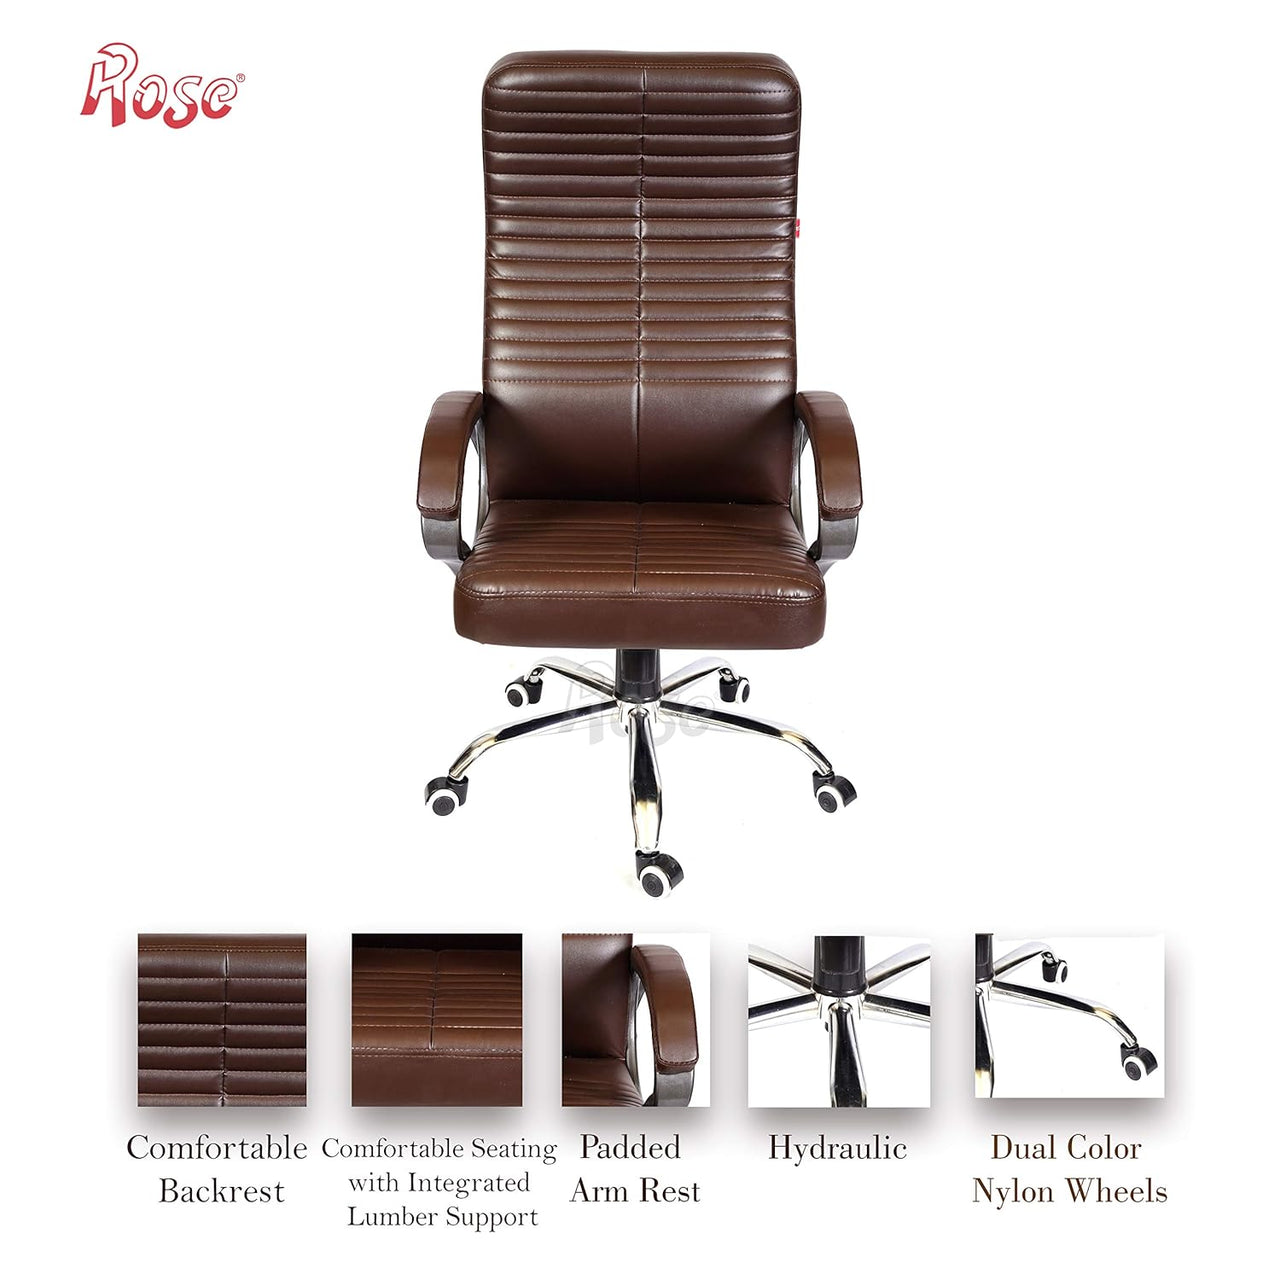 Roll 3 Executive High Back Leatherette Chair (Brown)